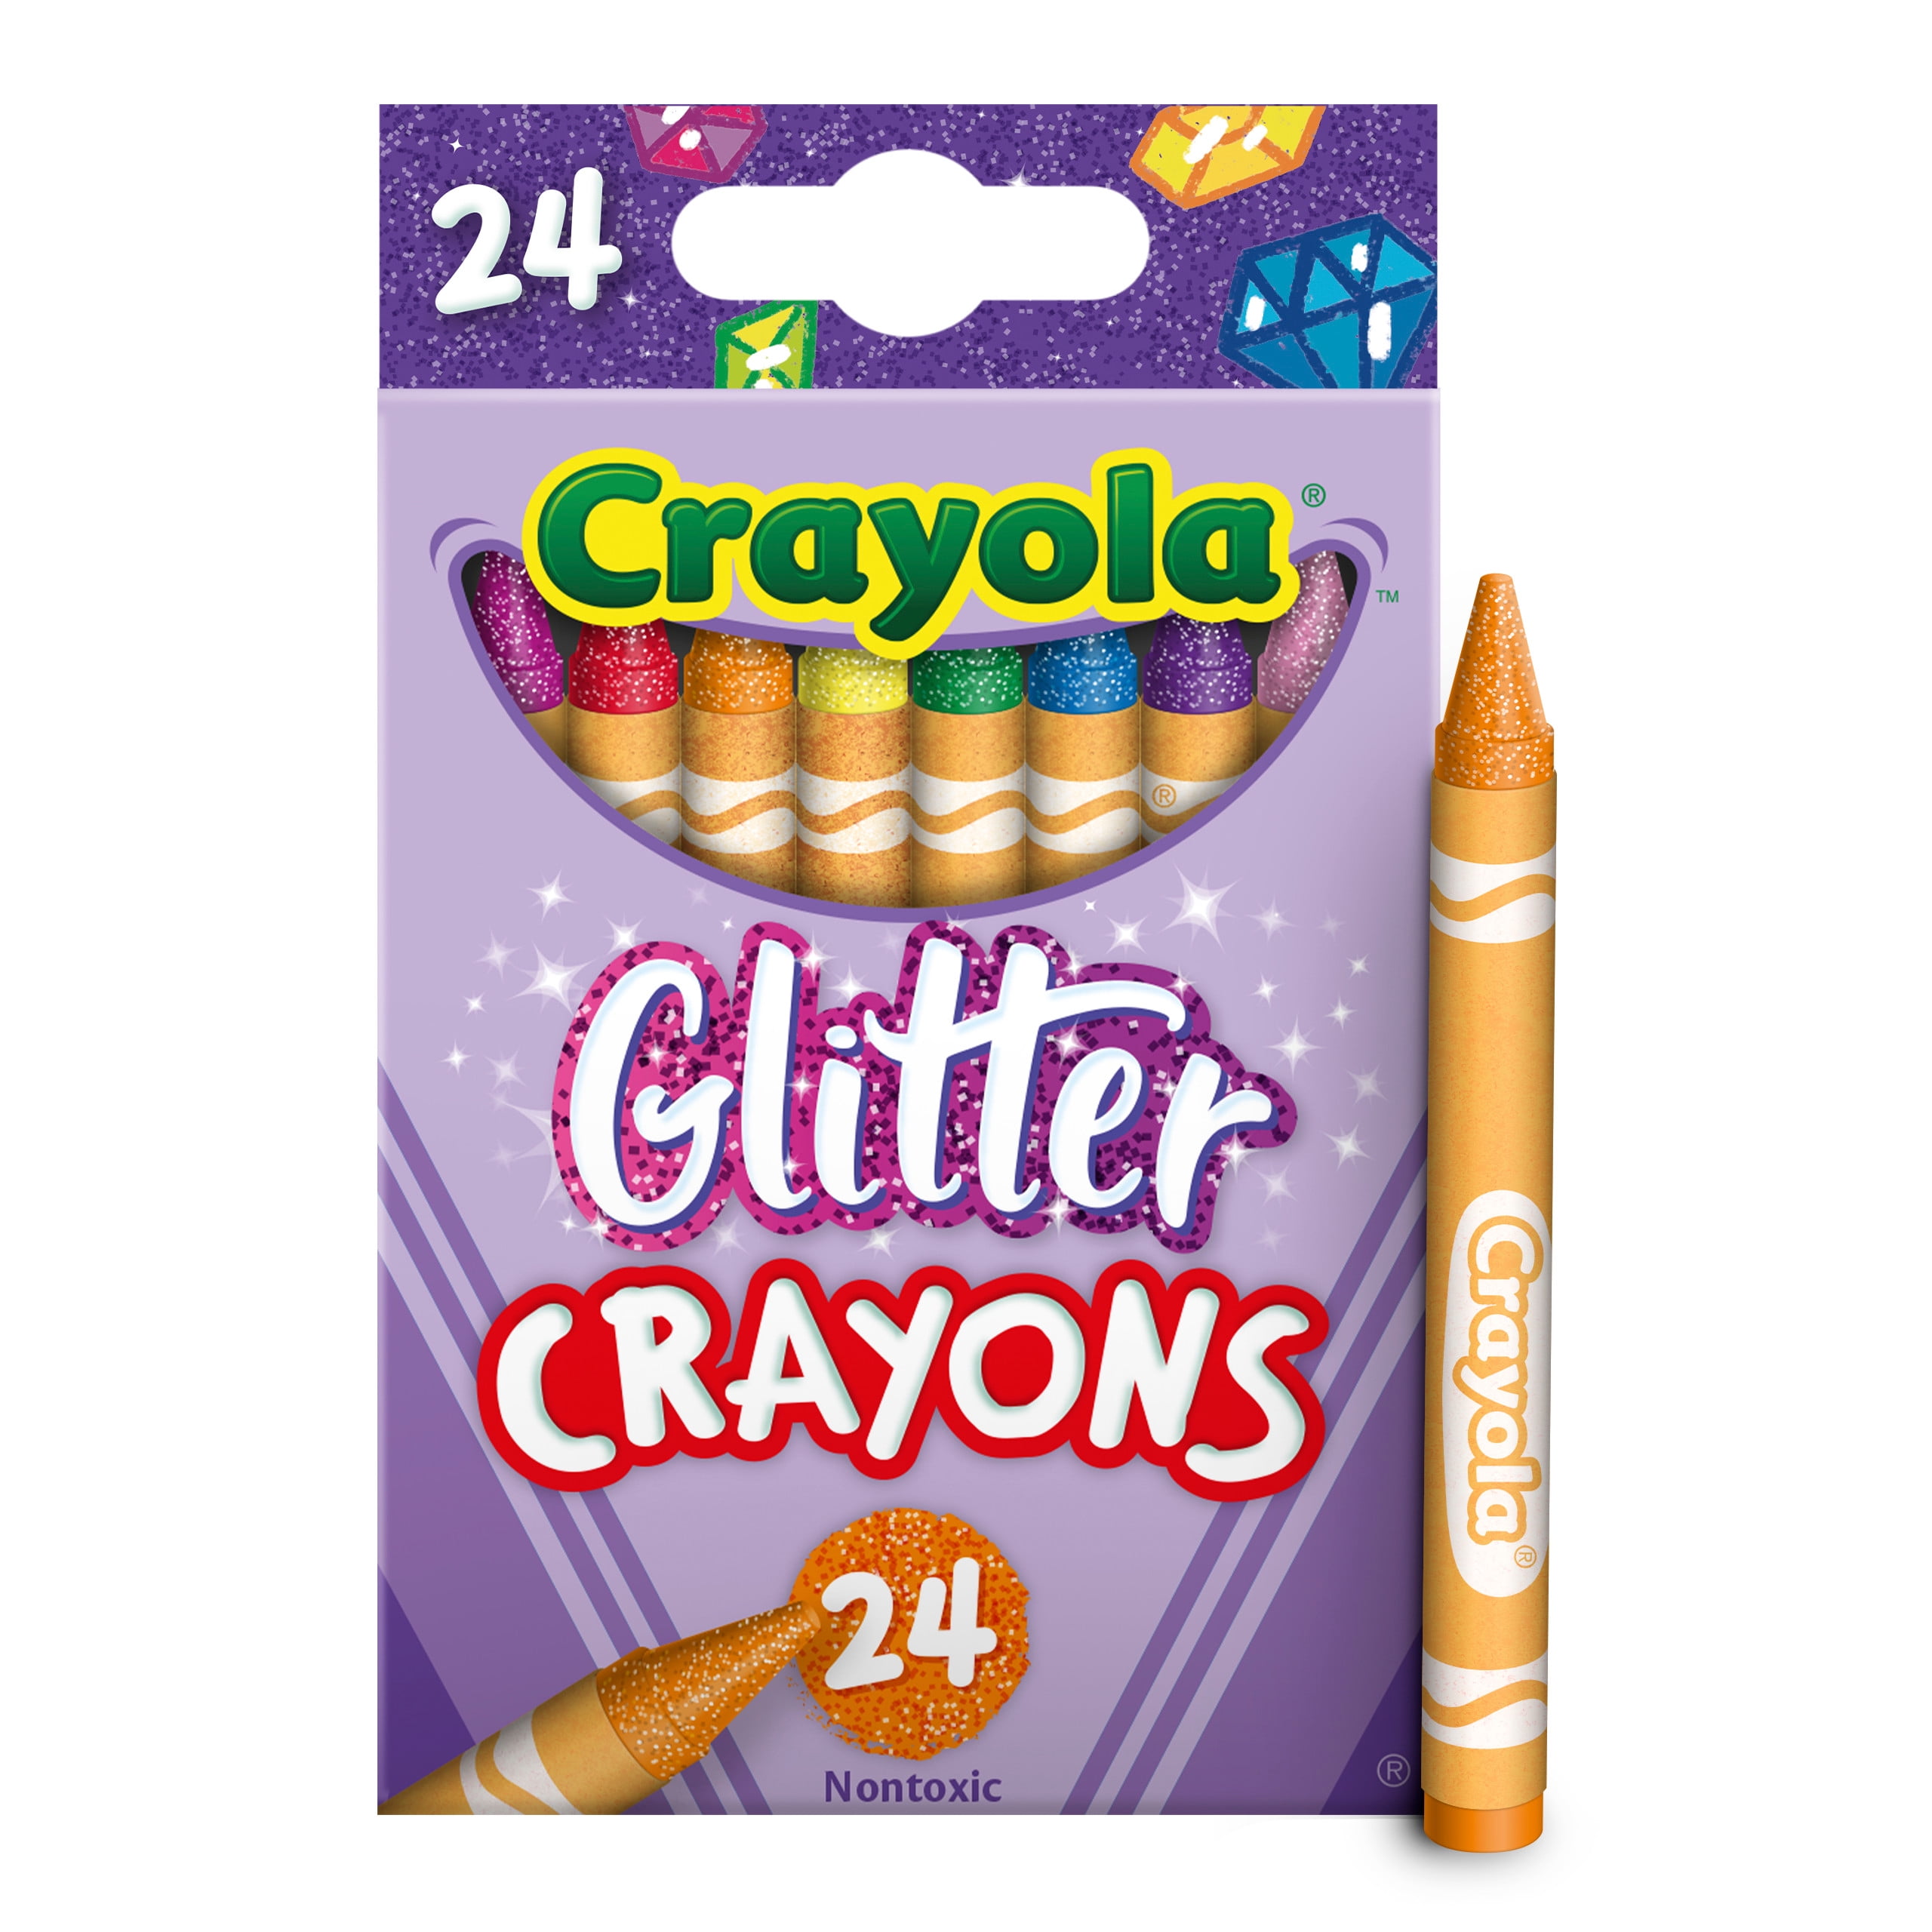 Crayola Special Effects Crayons, 96 Count